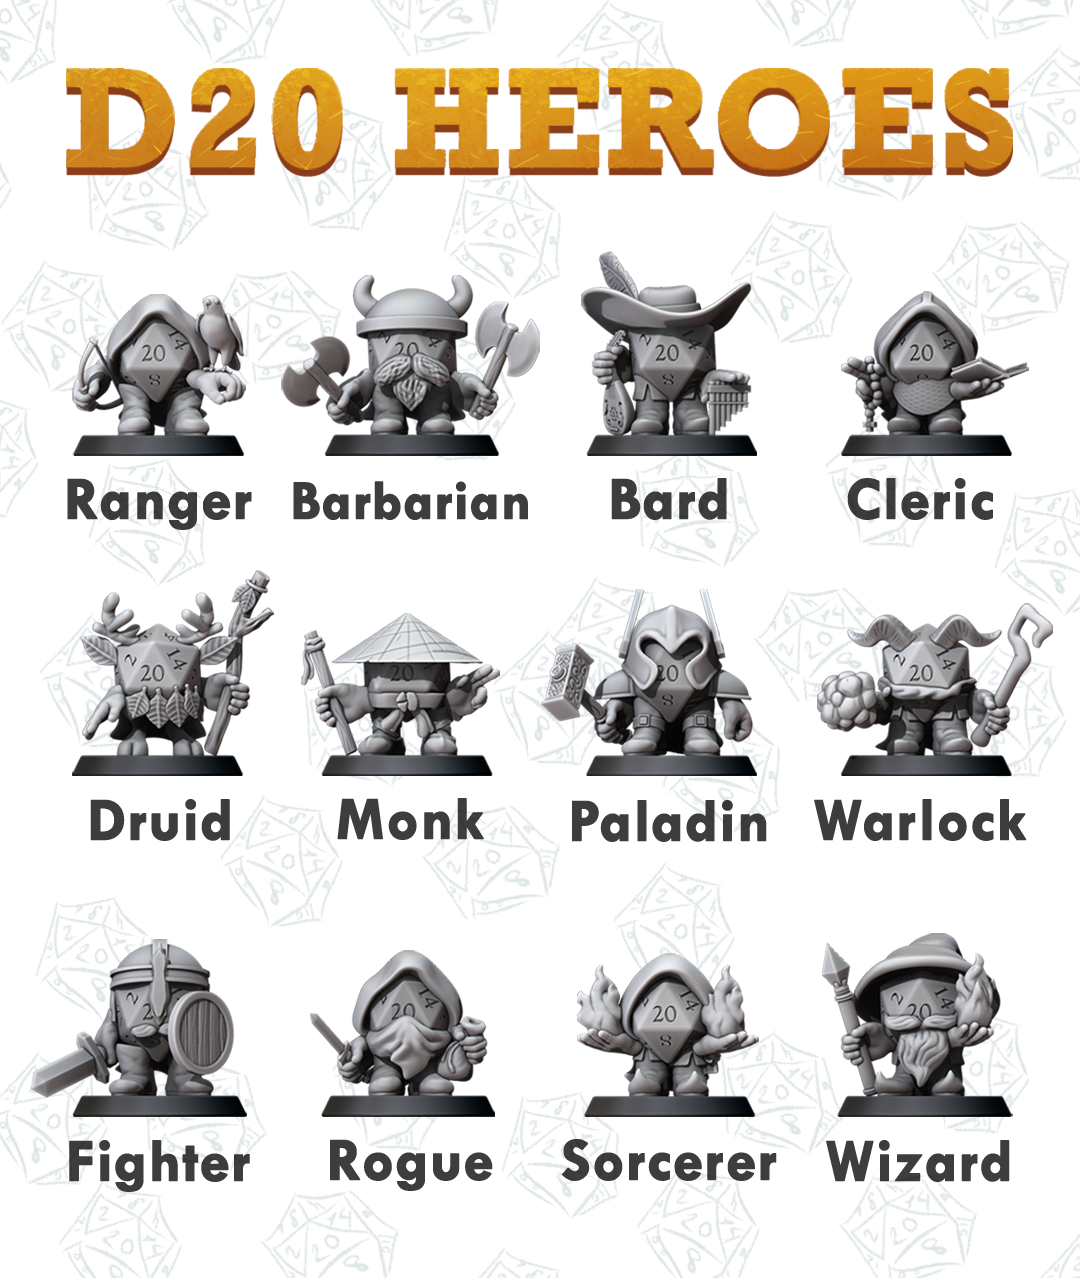 D20 Bakers Dozen Set, All 12 5e Classes Plus Artificer Construct Hero's (Small) by Minitaurus for Tabletop Games, Dioramas and Statues, Available in 15mm, 28mm, 32mm, 32mm heroic, 54mm and 75mm Statue Scale